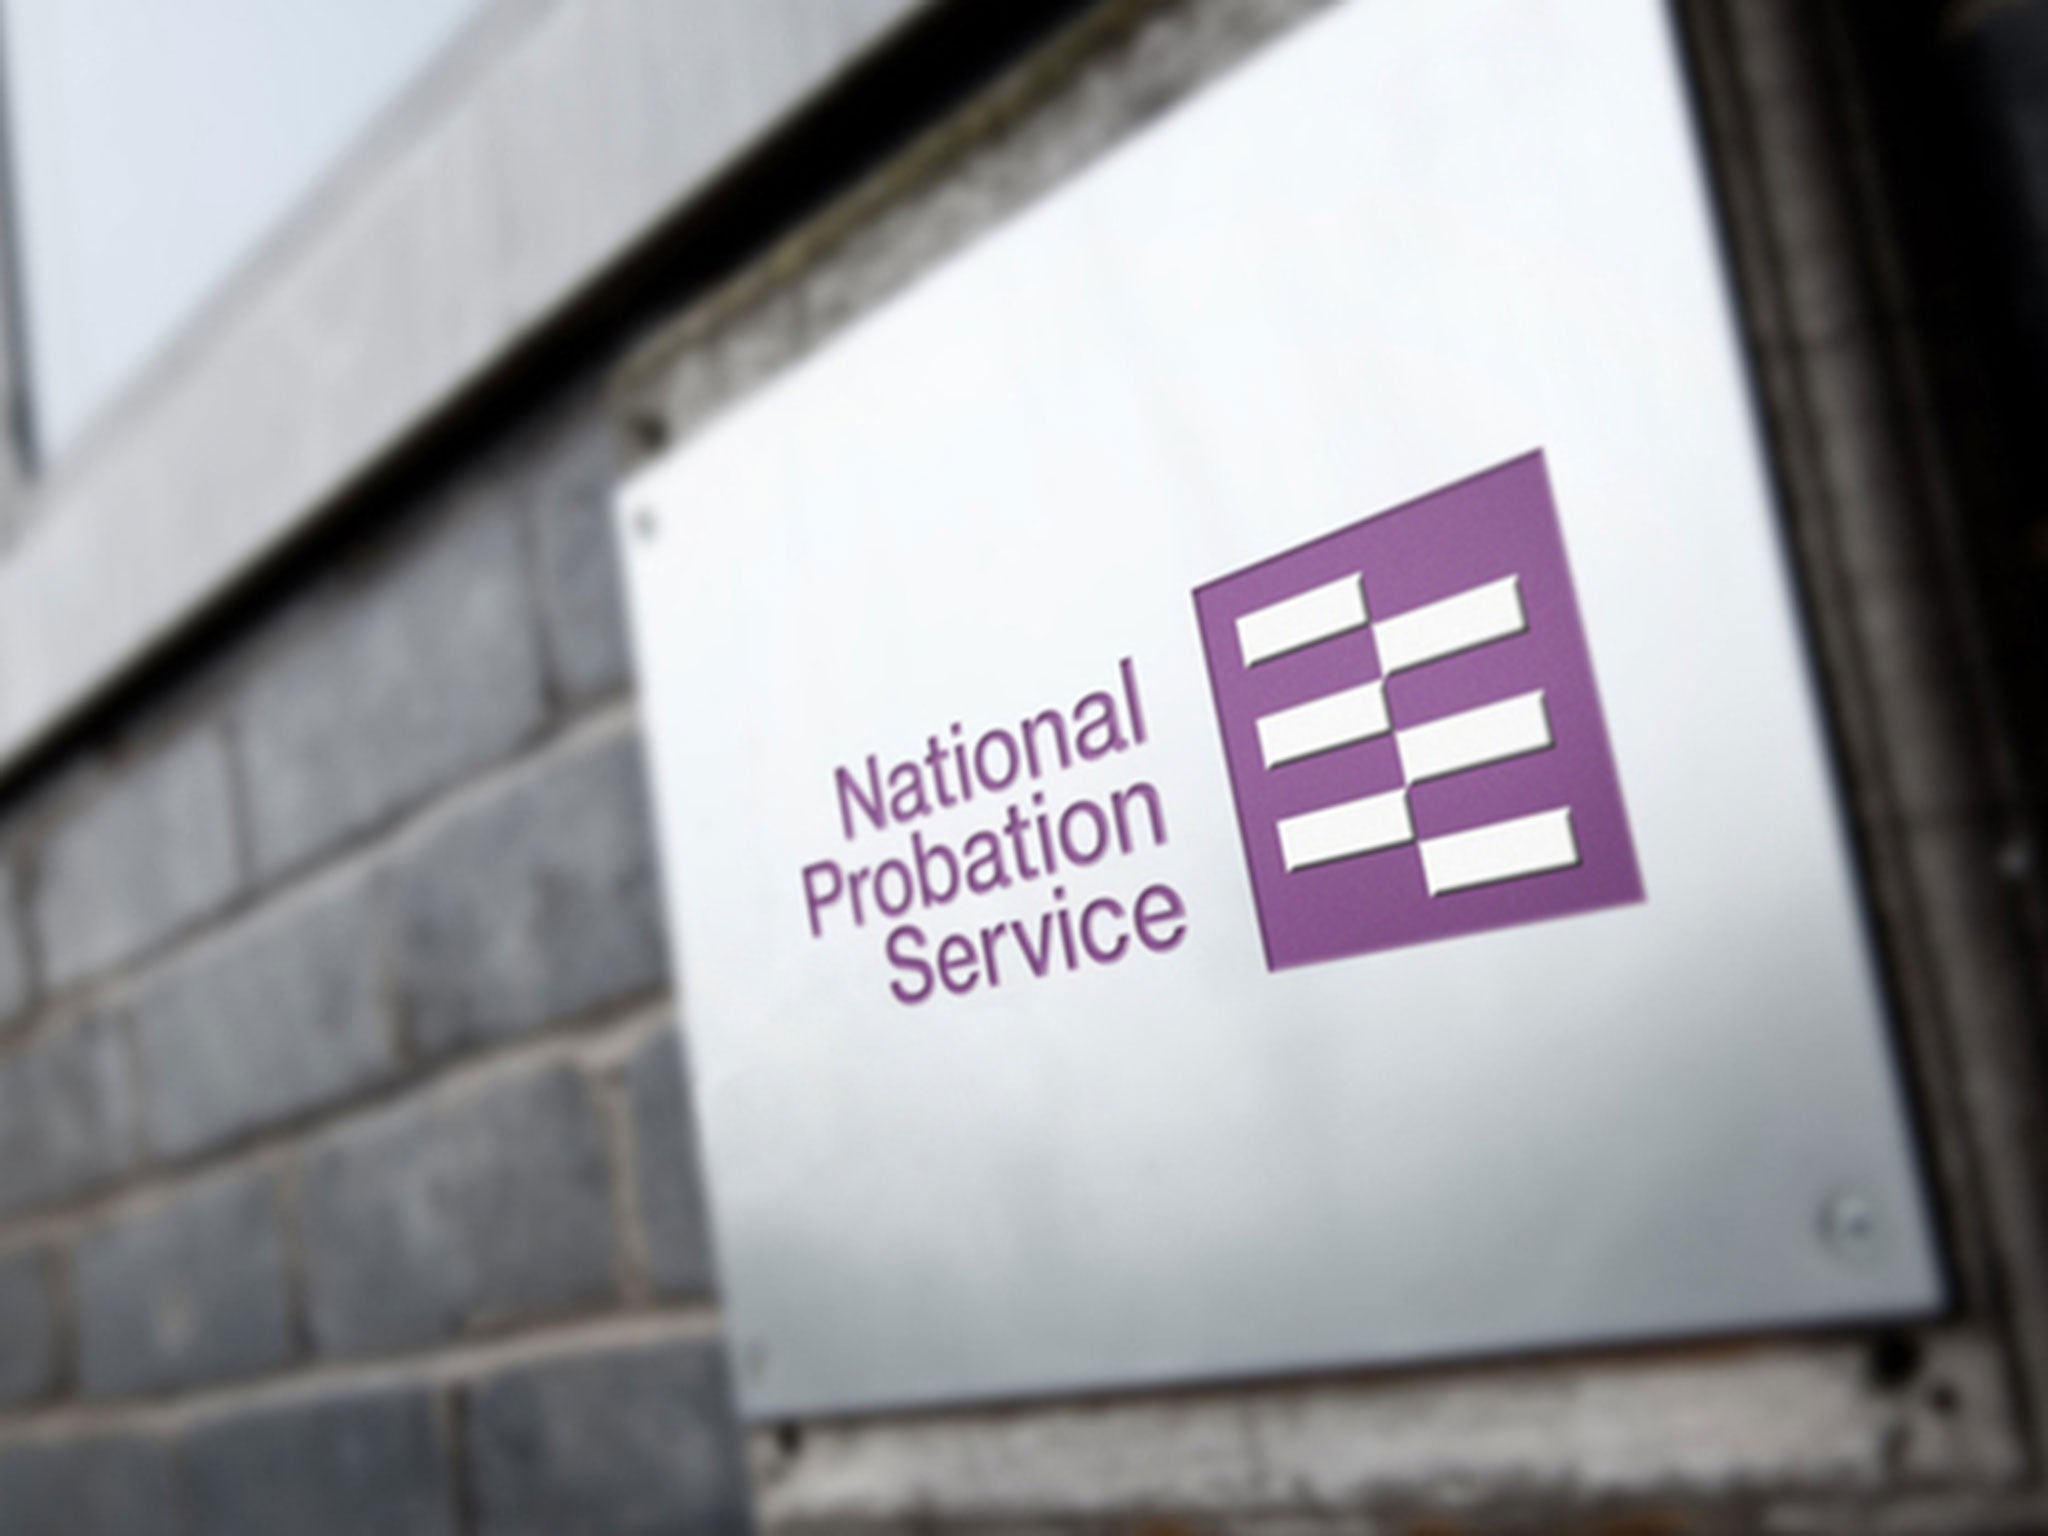 Rehabilitation and probation supervision work is split between the National Probation Service and private companies 